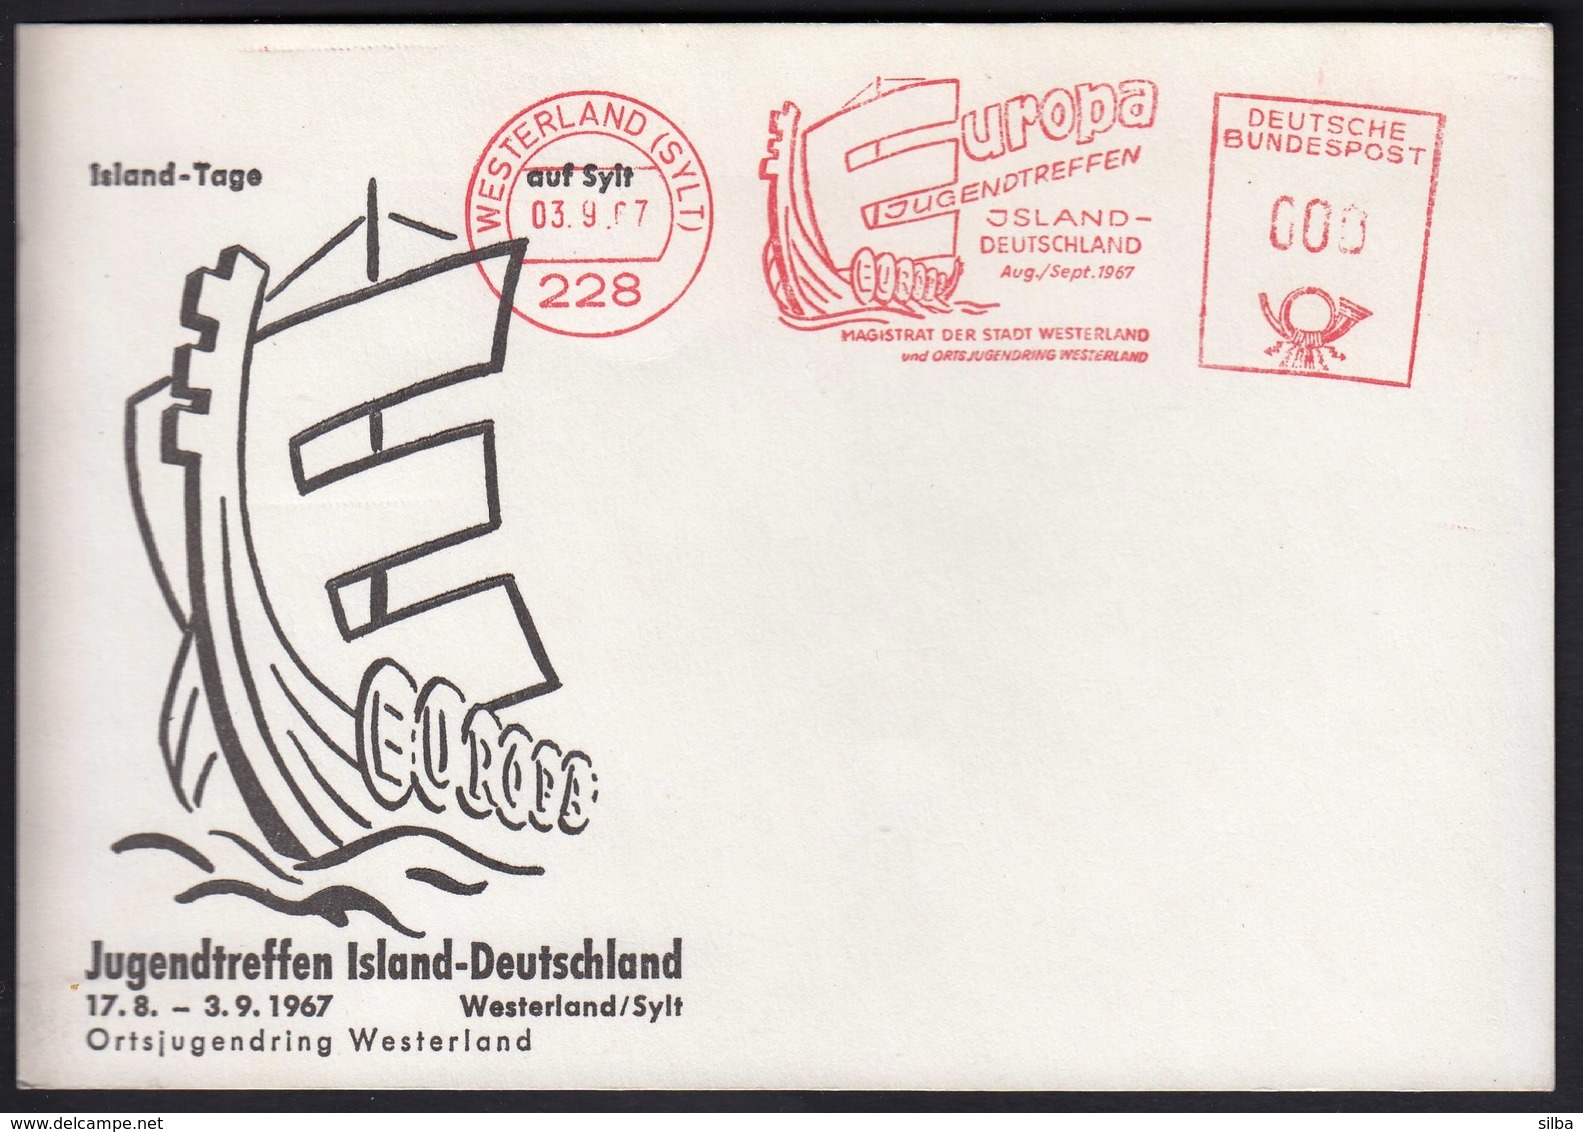 Germany Westerland 1967 / Europa Youth Meeting Island - Germany / Island Day In Sylt / Ship / Machine Stamp, EMA - European Ideas